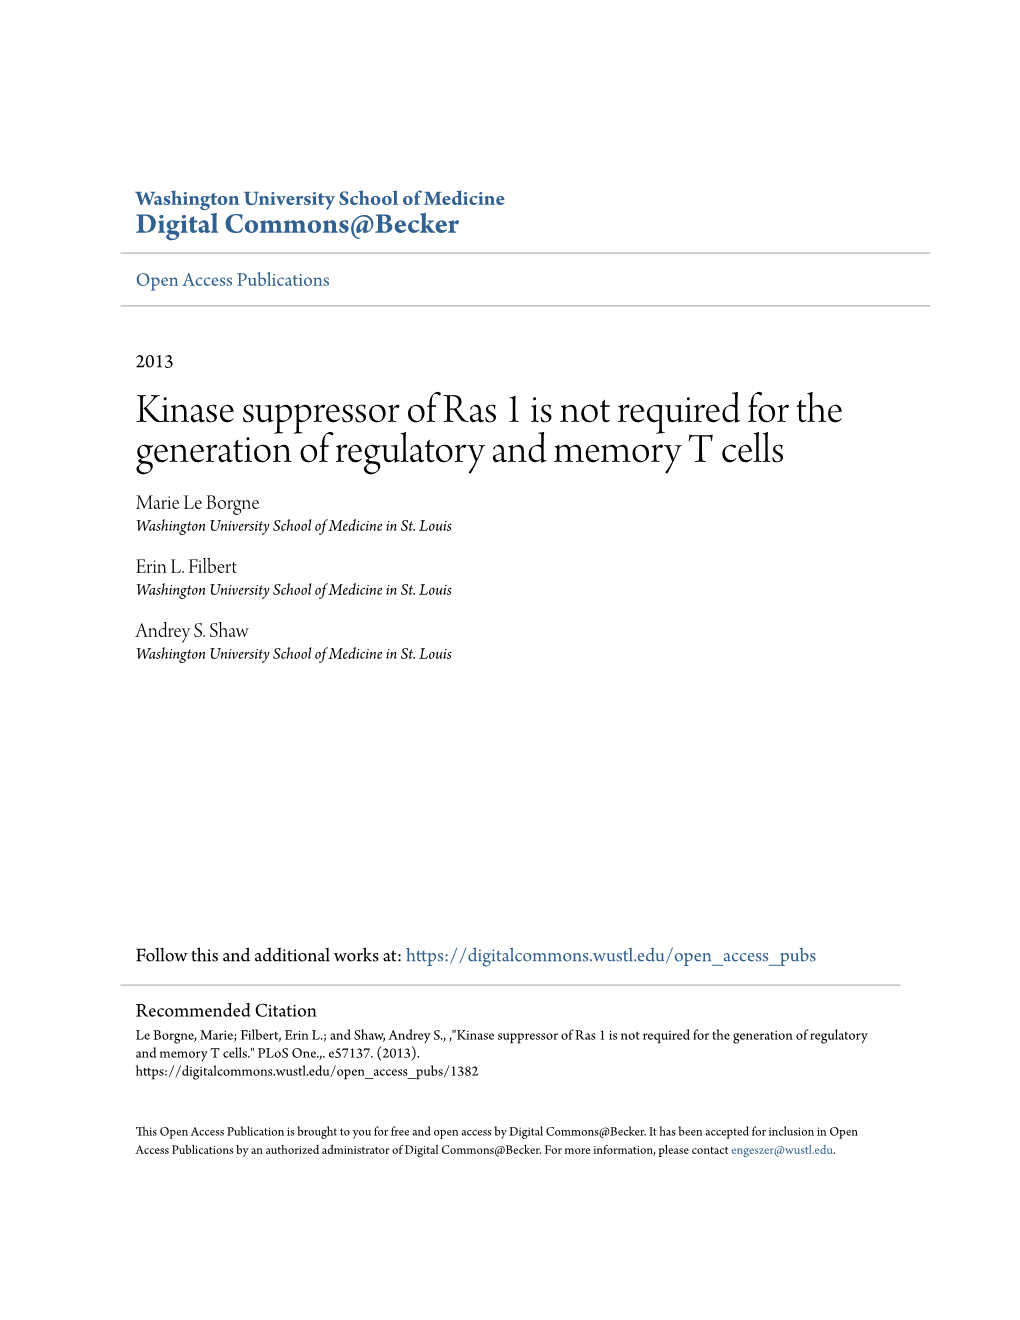 Kinase Suppressor of Ras 1 Is Not Required for the Generation of Regulatory and Memory T Cells Marie Le Borgne Washington University School of Medicine in St